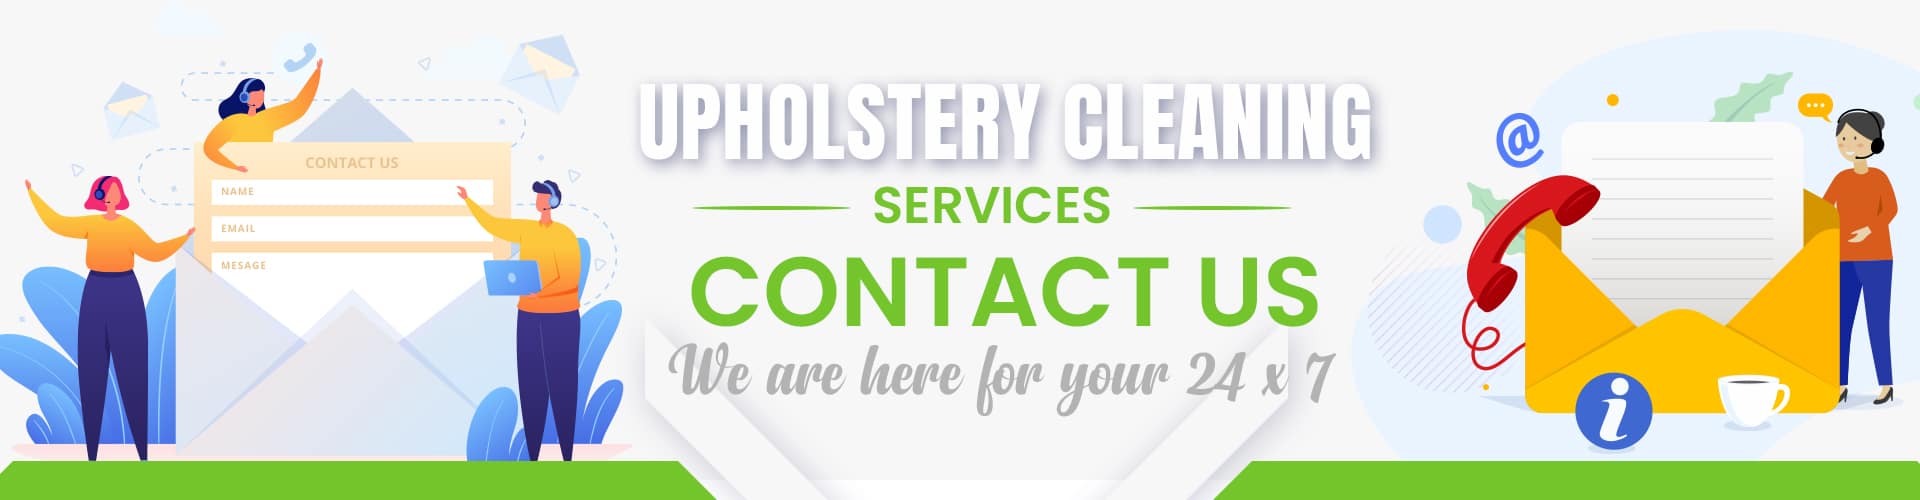 Contact Us For Upholstery Cleaning Services